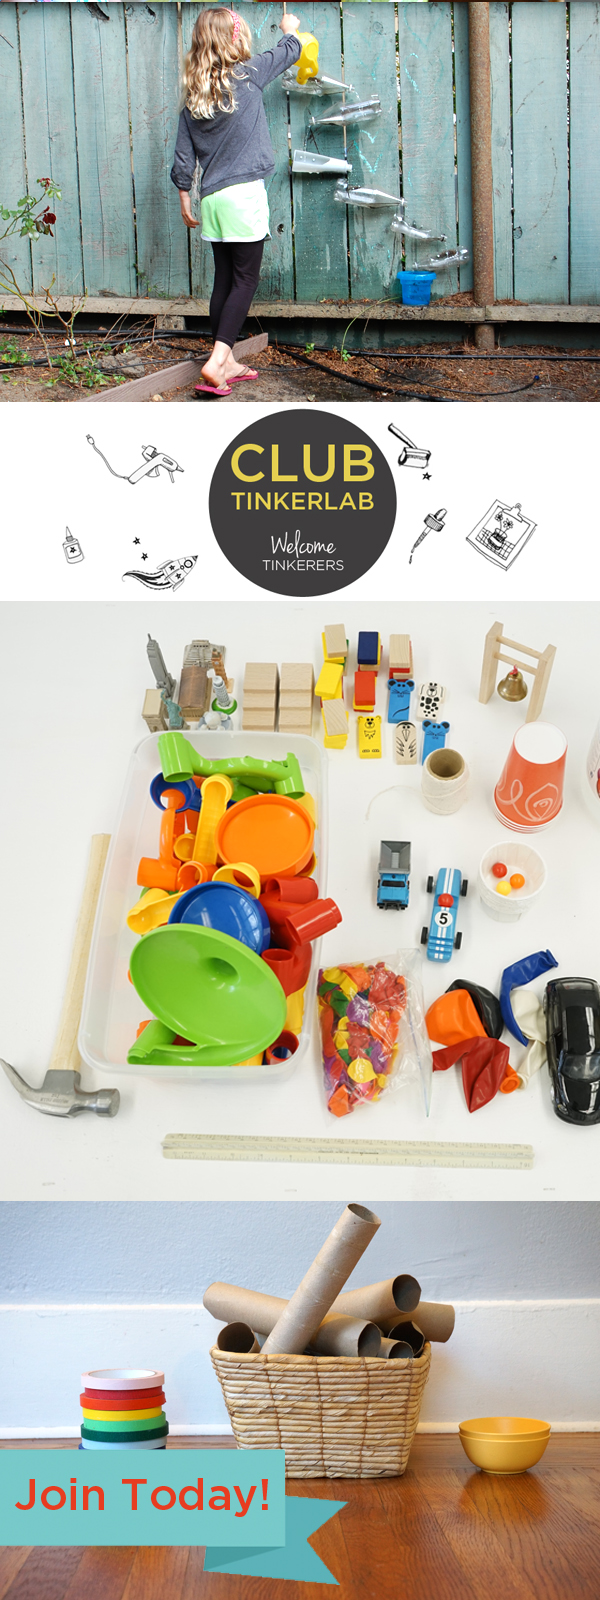 Join Club TinkerLab - an online tinkering club for people who are interested in making, inventing, tinkering, educating, and engineering with kids. 